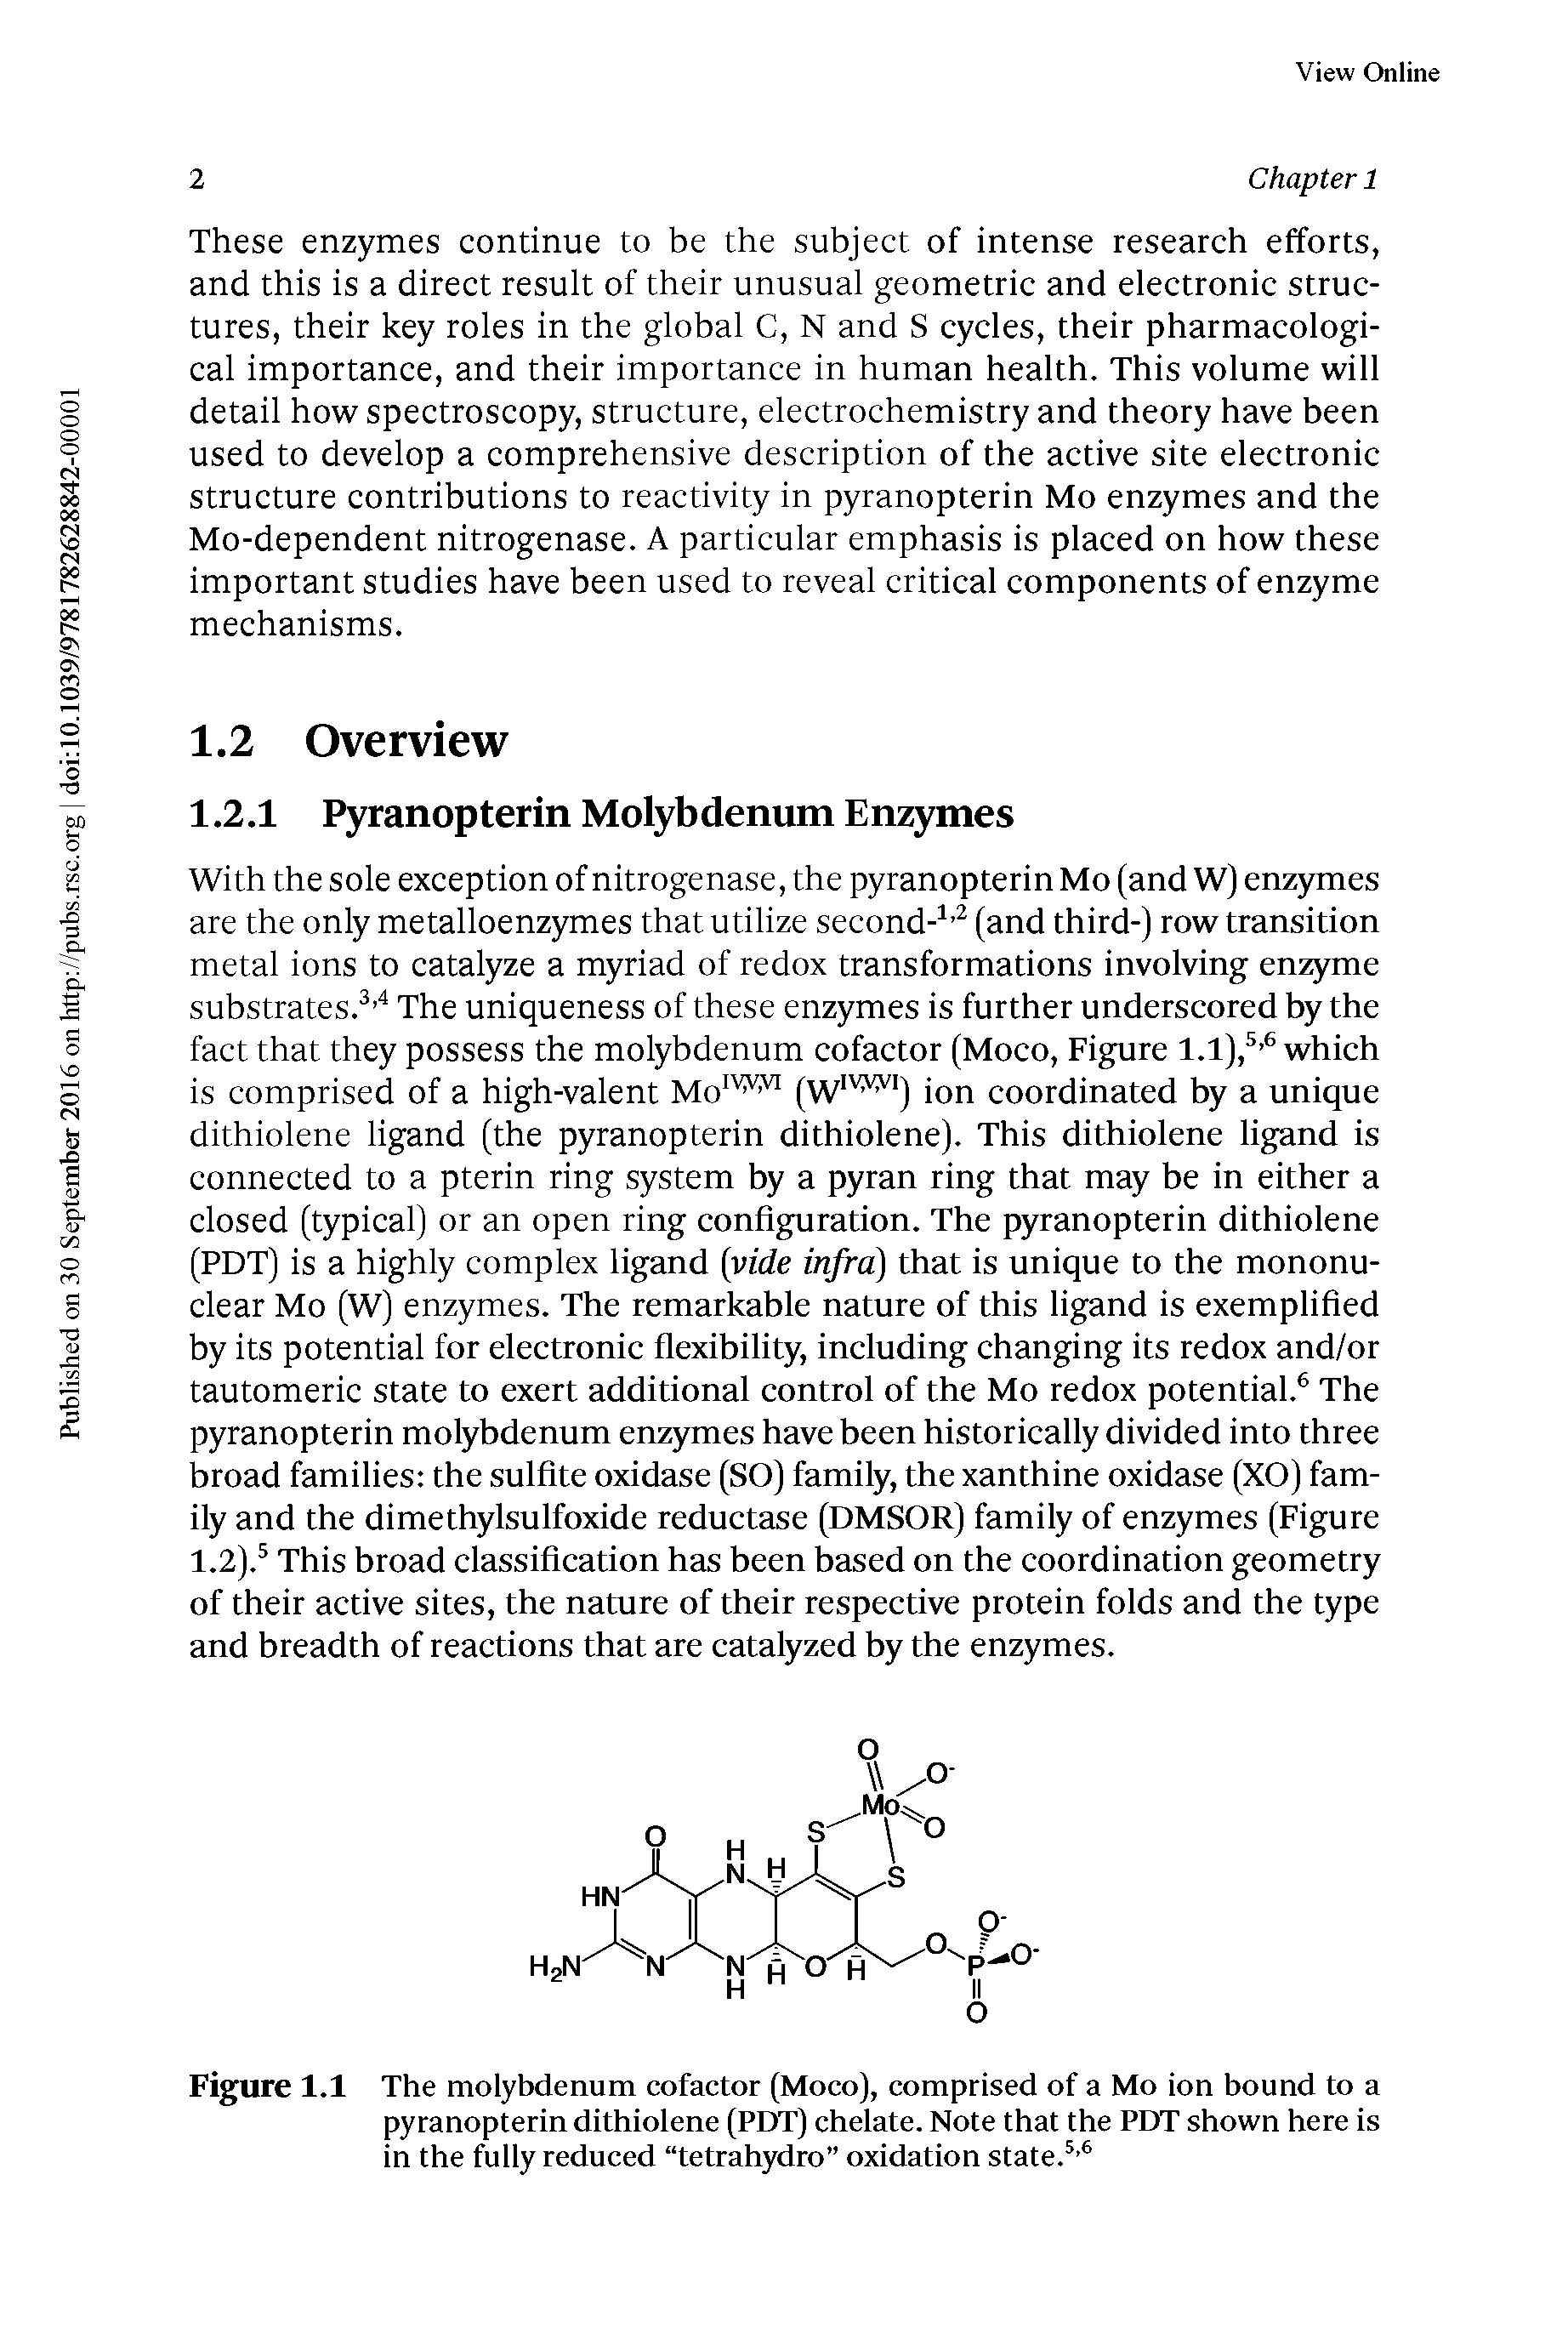 Figure 1.1 The molybdenum cofactor (Moco), comprised of a Mo ion bound to a pyranopterin dithiolene (PDT) chelate. Note that the PDT shown here is in the fully reduced tetrahydro oxidation state. ...